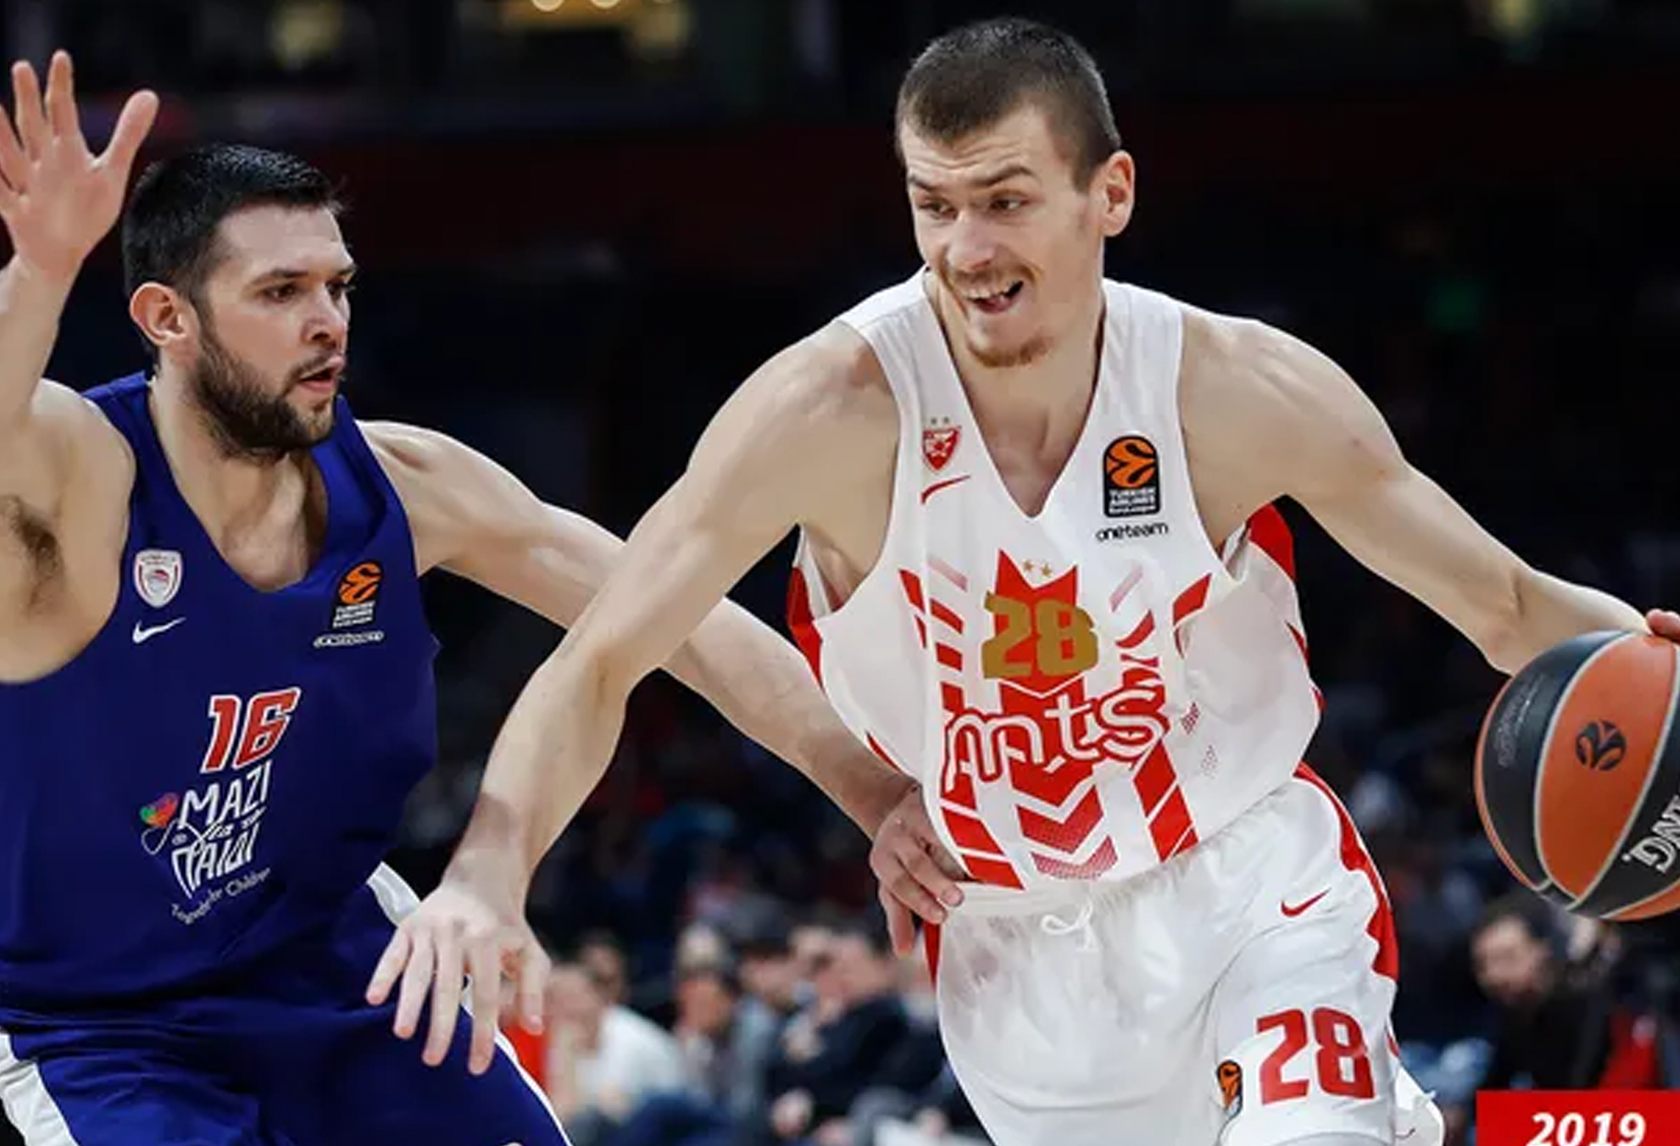 Shattering Blow: Serbian Basketball Player Loses Kidney in FIBA World Cup Game